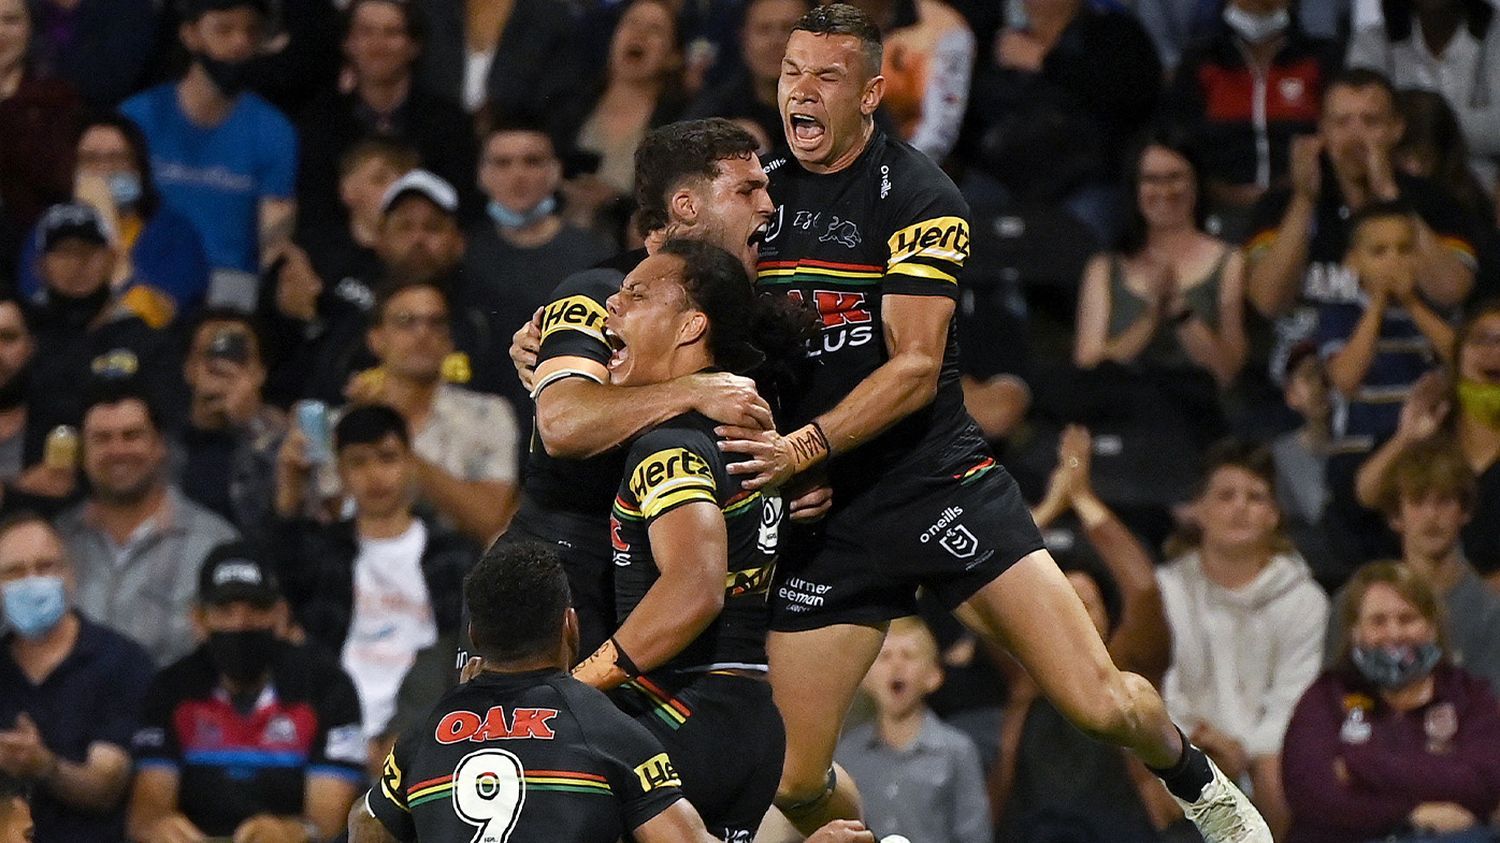 The Panthers celebrate a try.